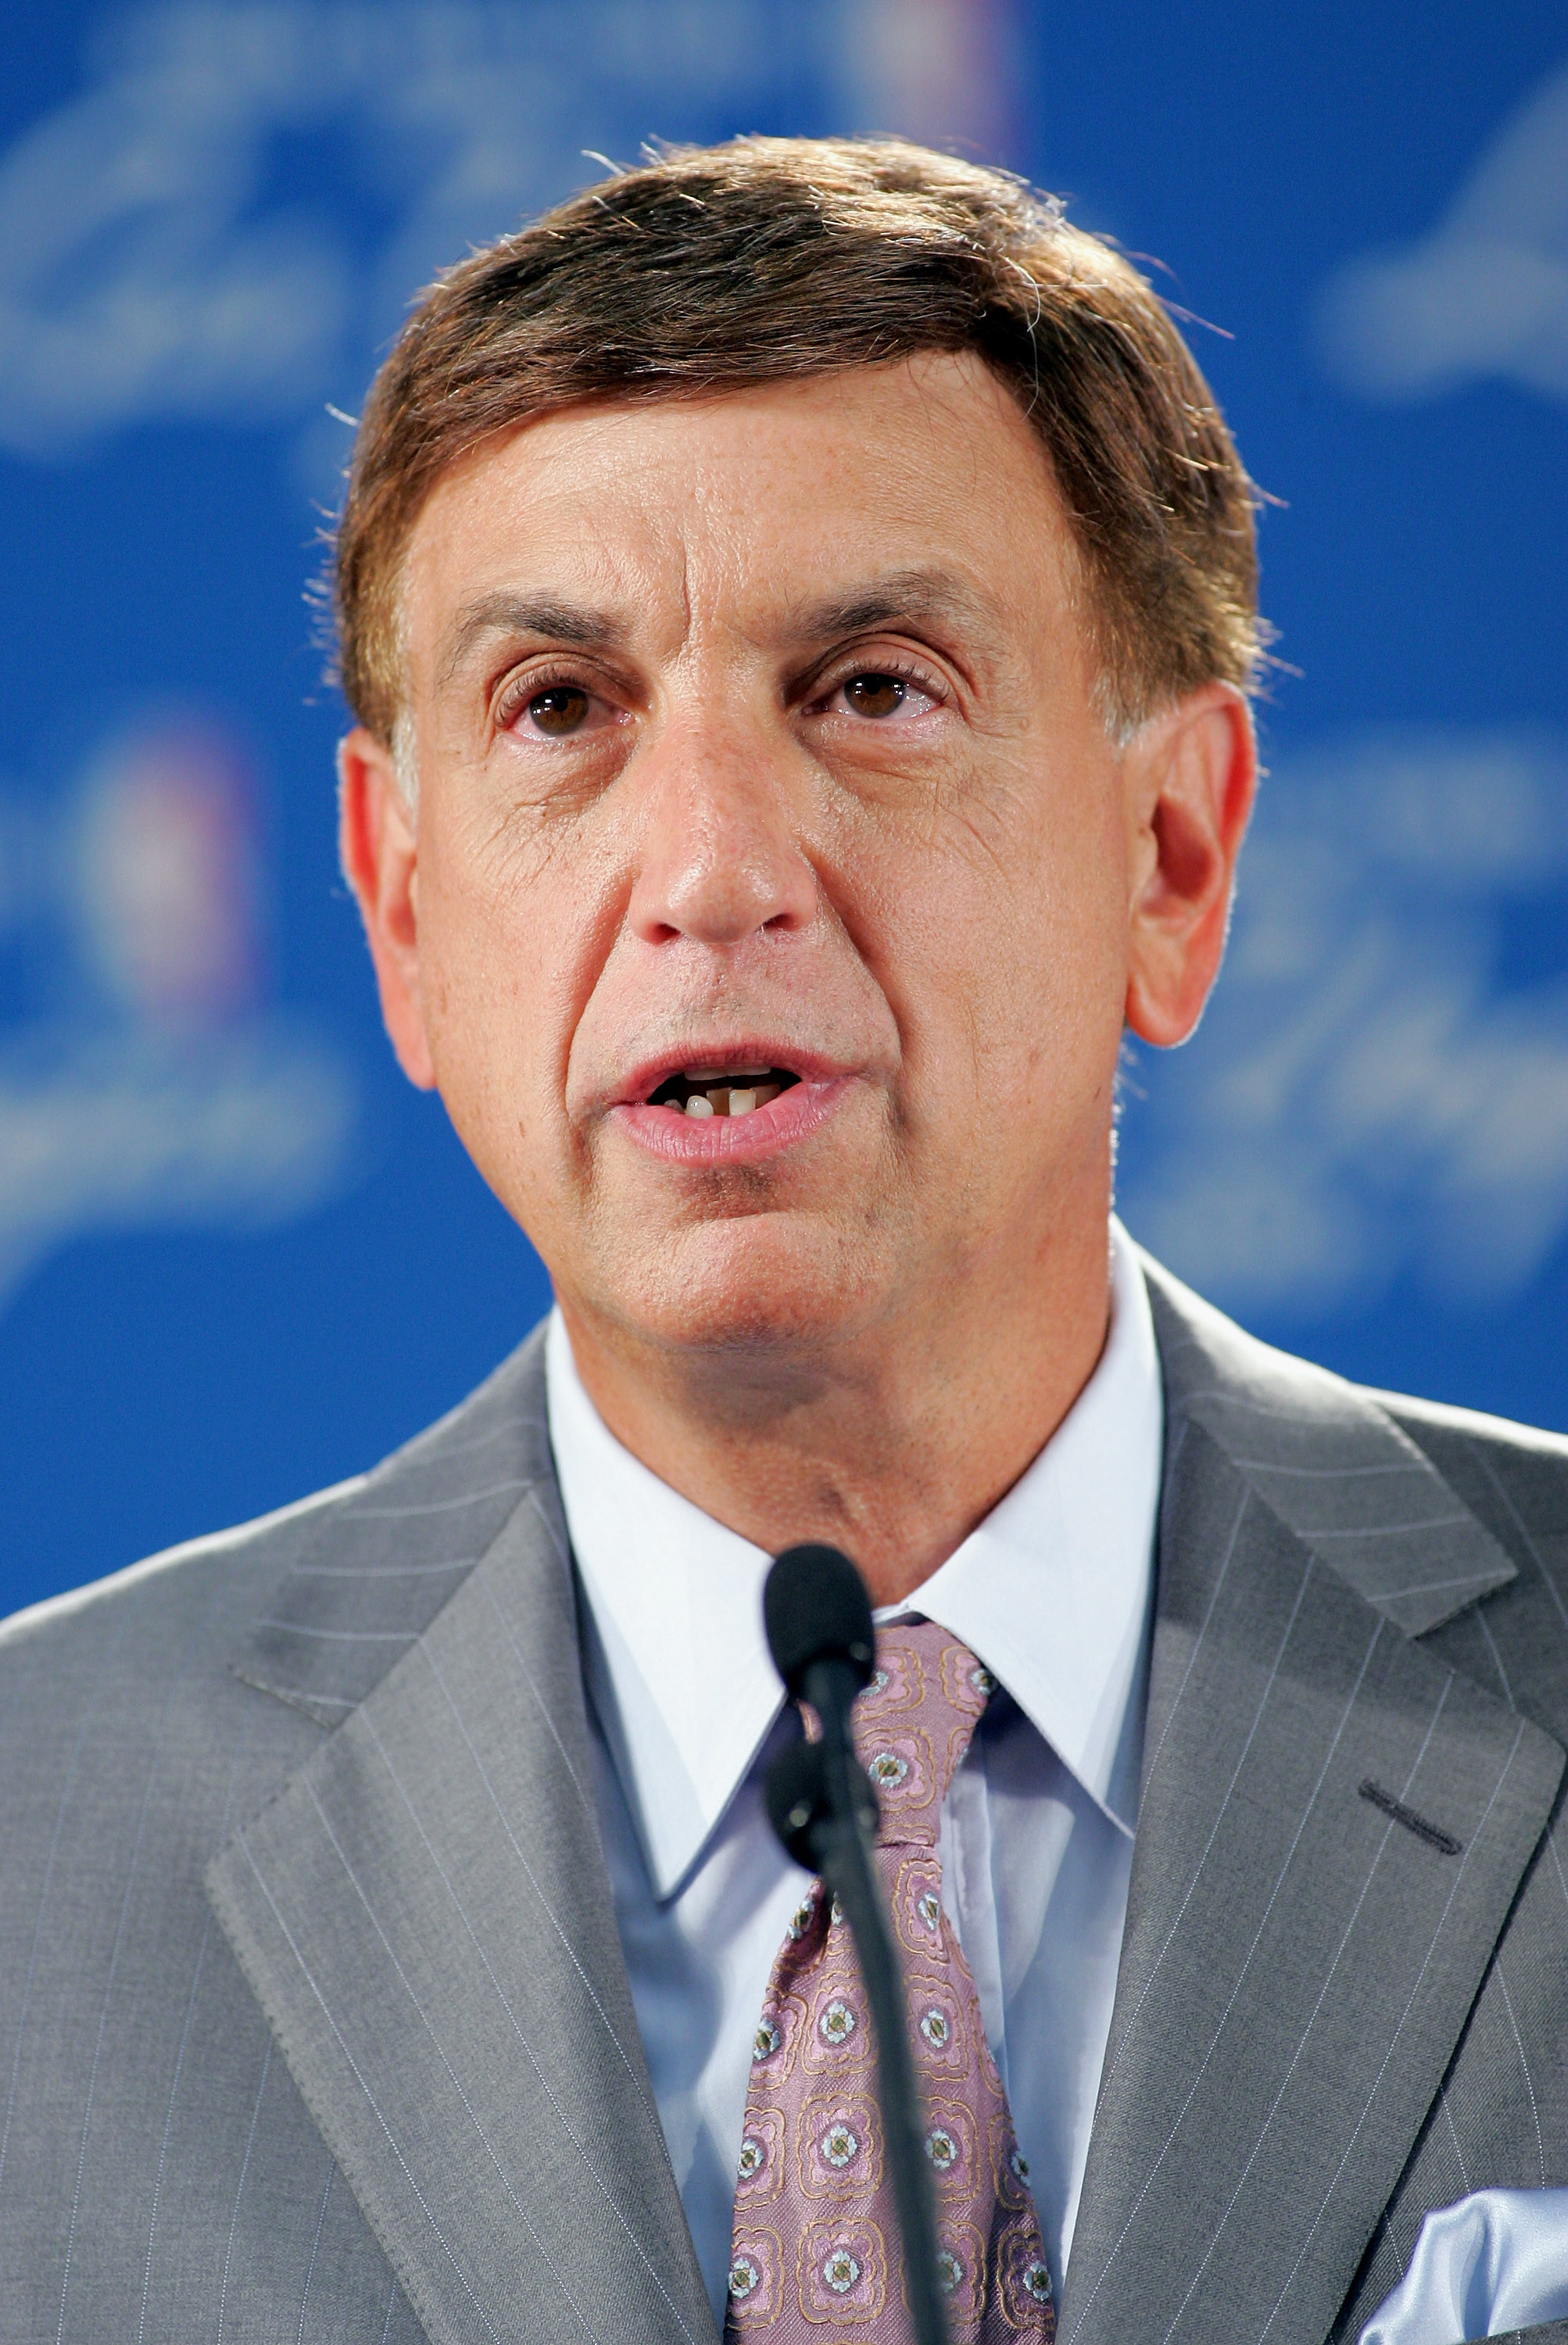 LAS VEGAS - AUGUST 5:  NBA announcer for TNT, Marv Albert, speaks at a news conference announcing that the city of Las Vegas will host the 2007 NBA All-Star Game held on August 5, 2005 at the Las Vegas Convention Center in Las Vegas, Nevada. It will be th